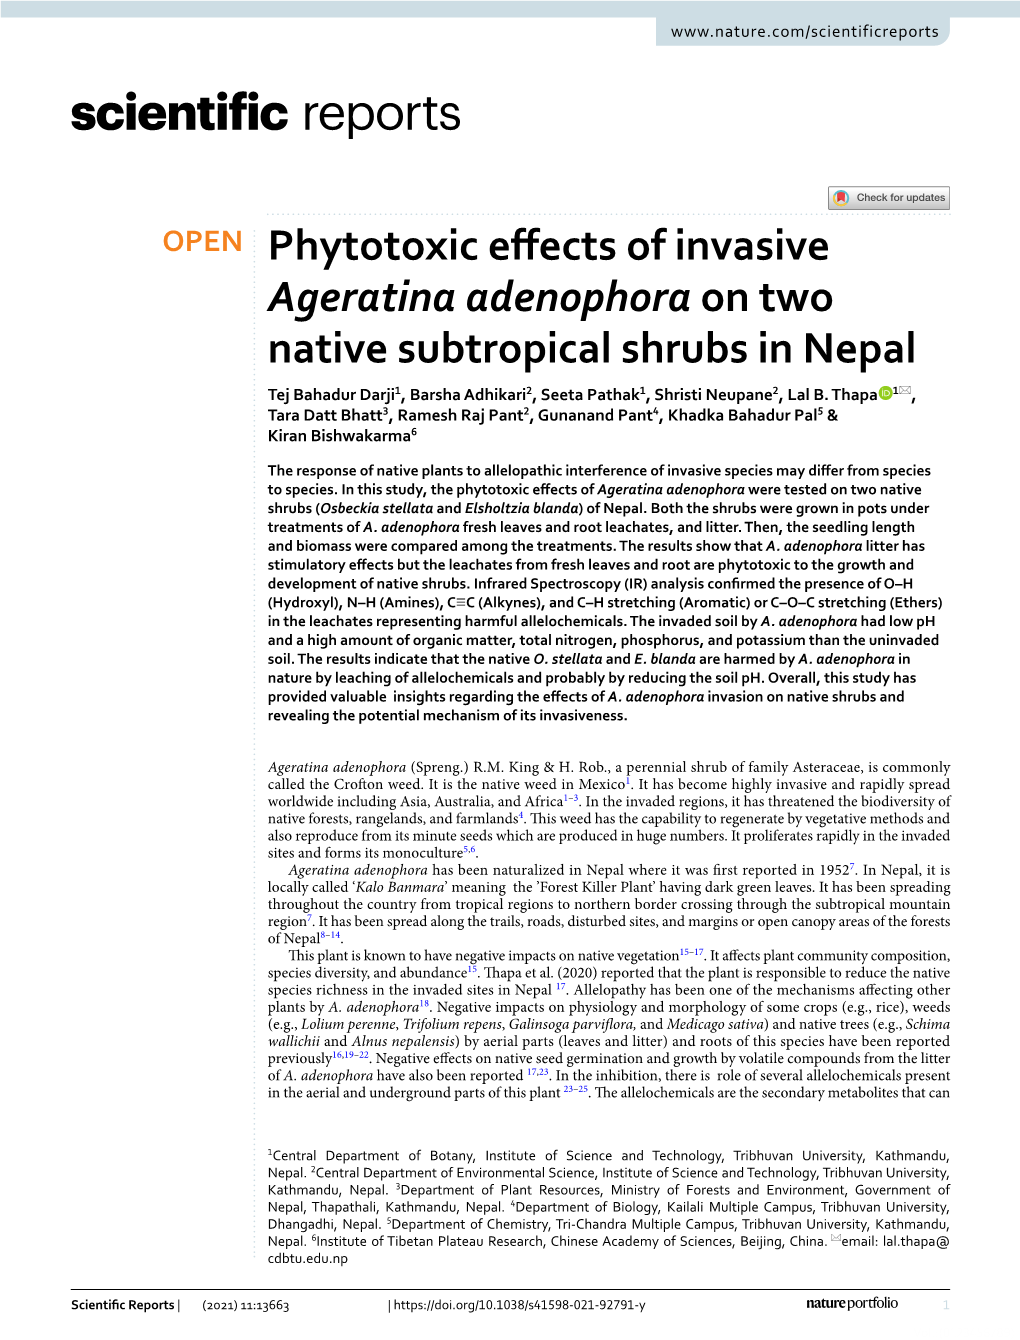 Phytotoxic Effects of Invasive Ageratina Adenophora on Two Native Subtropical Shrubs in Nepal